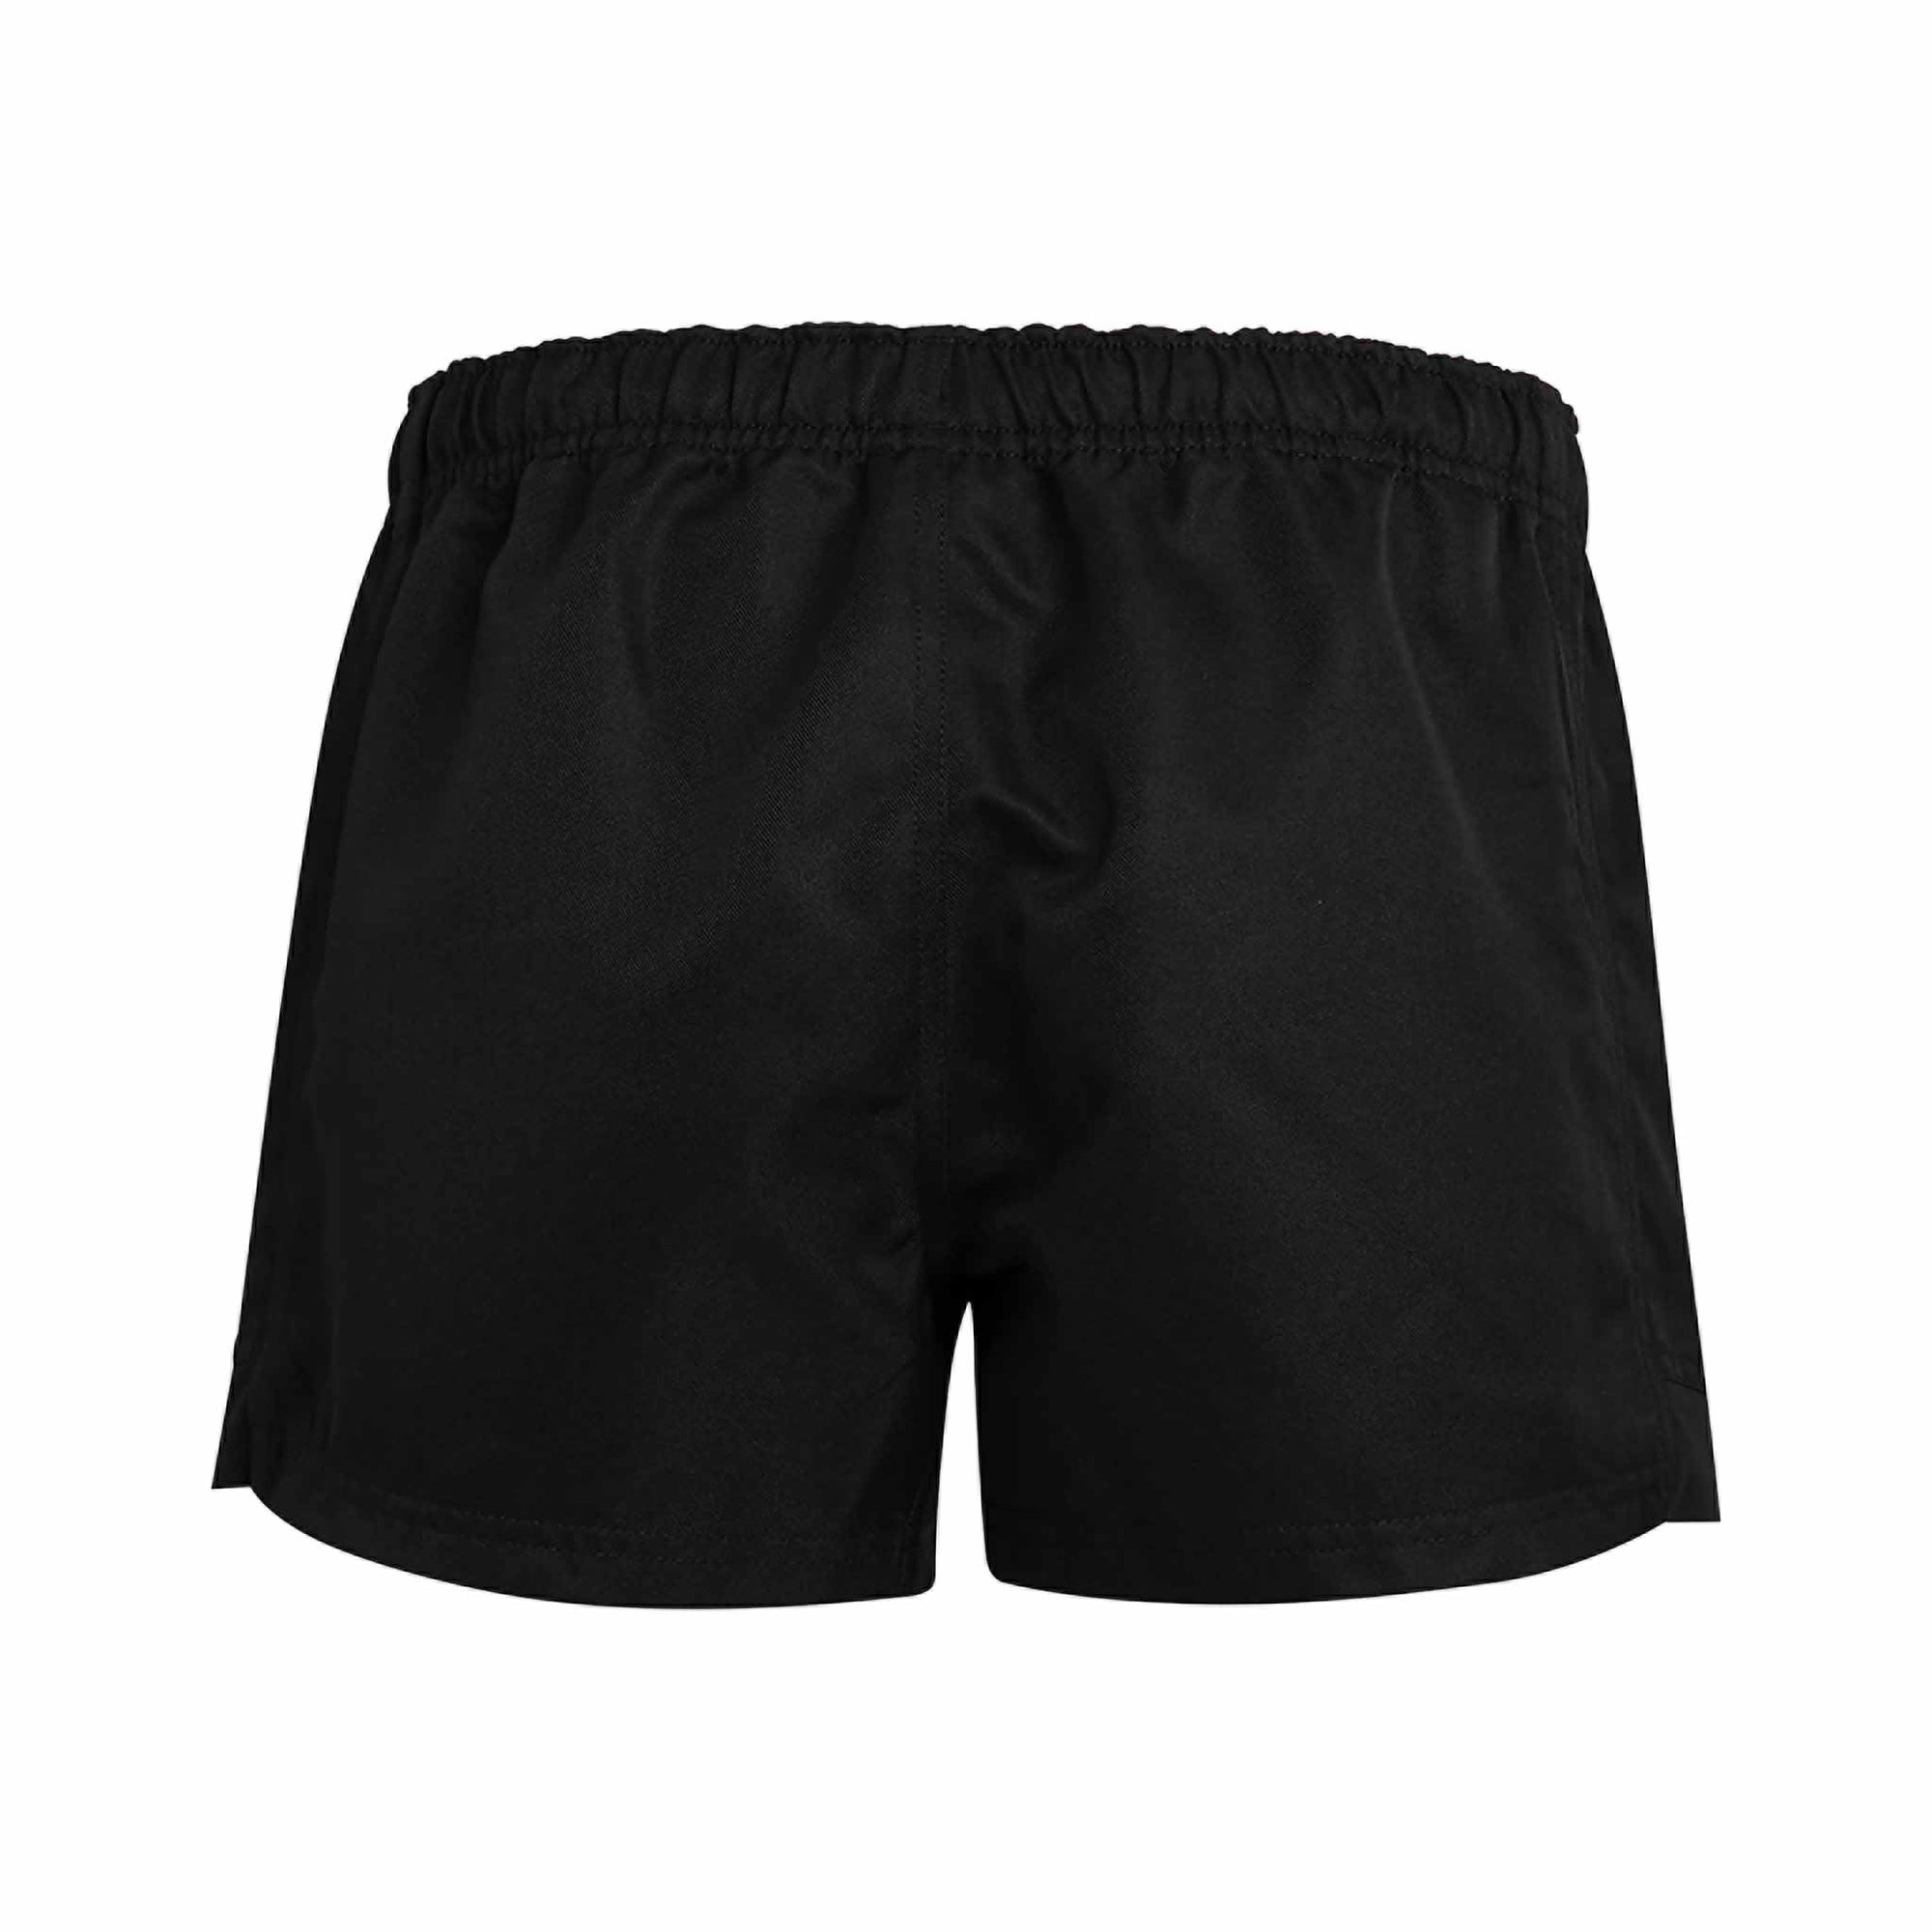 UW Women's Huskies Rugby Club Canterbury AdvanTage Shorts- WOMEN'S - Black - The Rugby Shop The Rugby Shop WOMEN'S / Black / 6 TRS Distribution Canada Rugby Shorts UW Women's Huskies Rugby Club Canterbury AdvanTage Shorts- WOMEN'S - Black